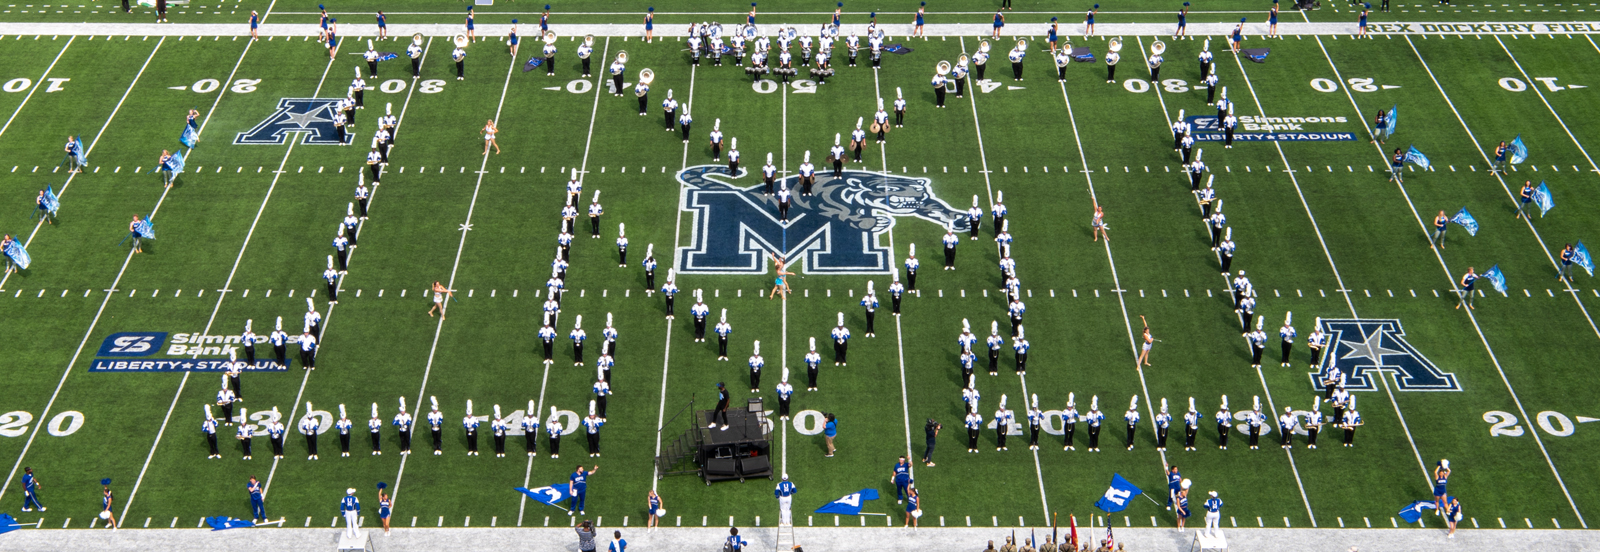 UofM band in formation.